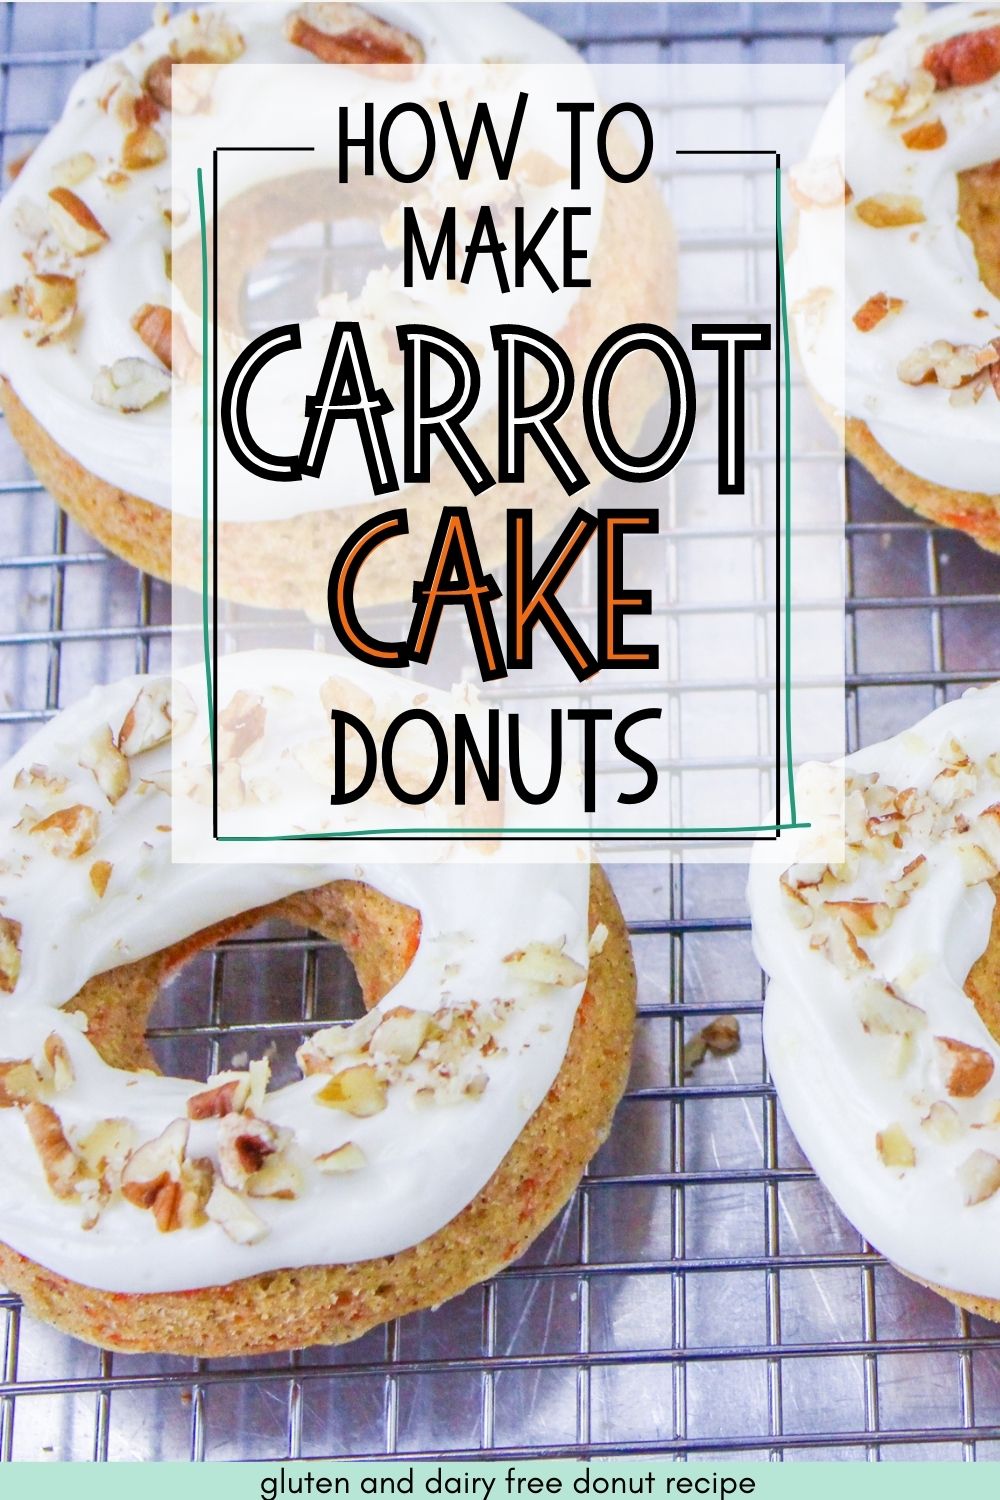 Carrot cake donuts with text overlay. 